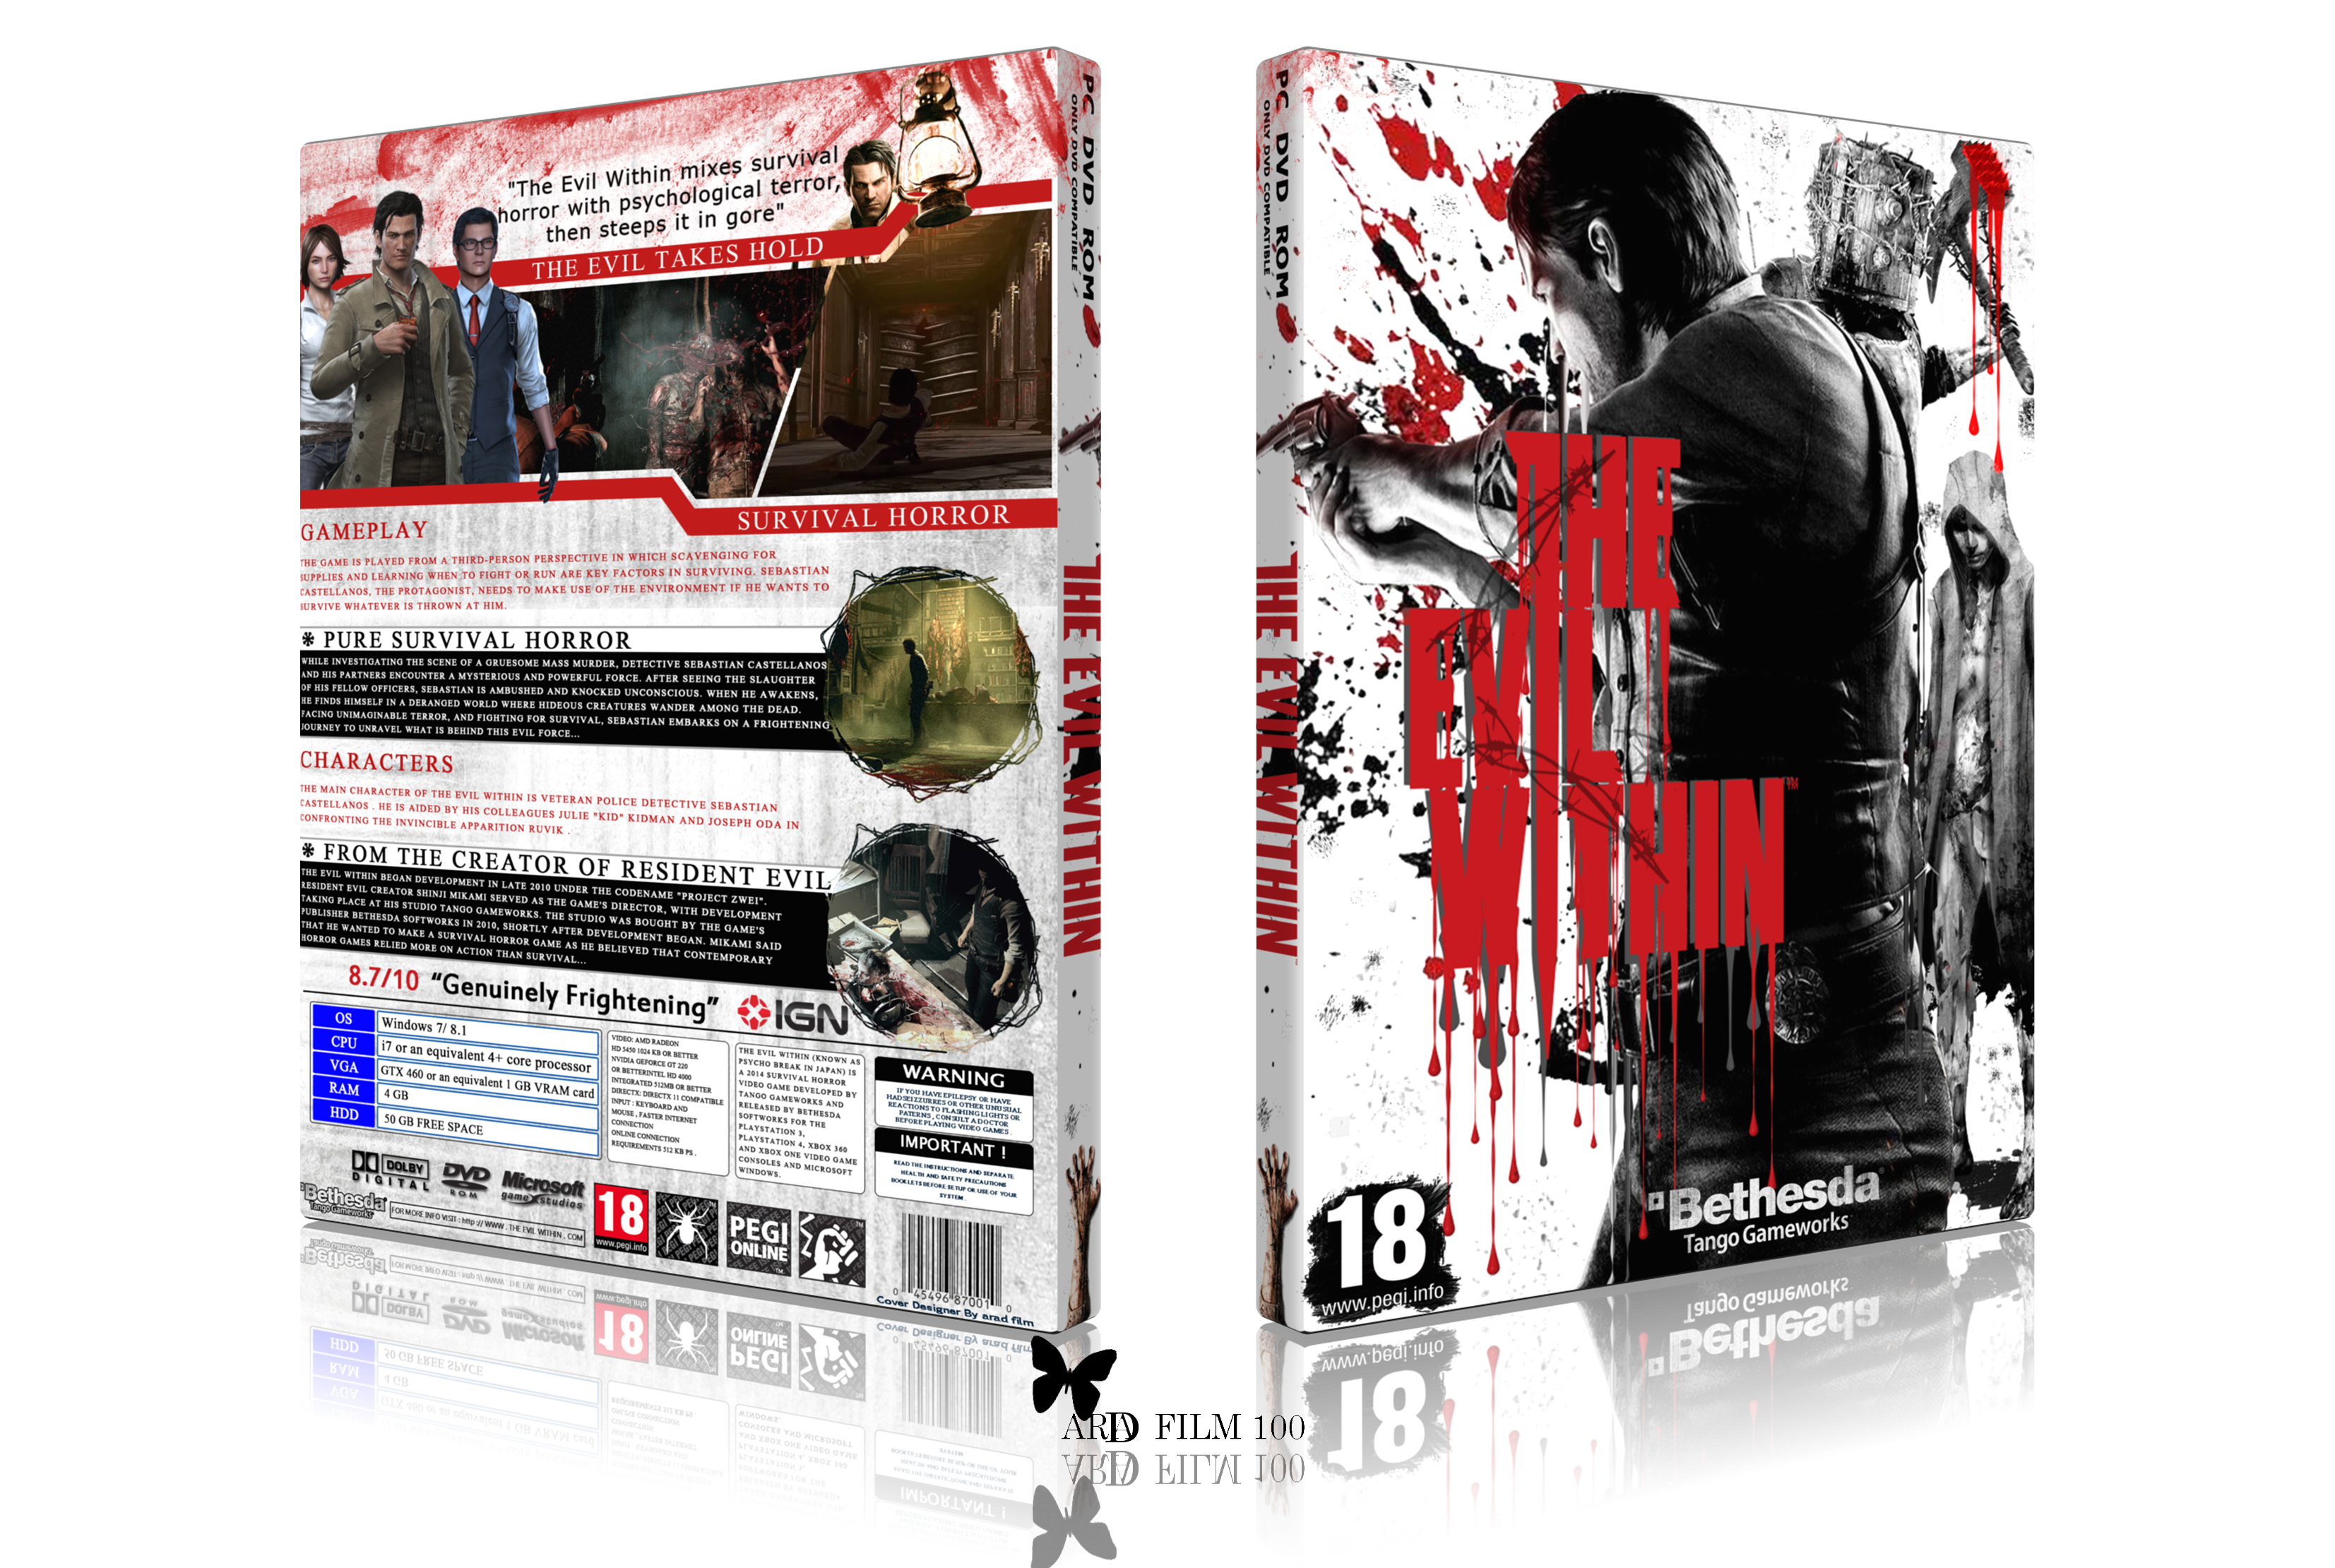 TEH Evil Within box cover